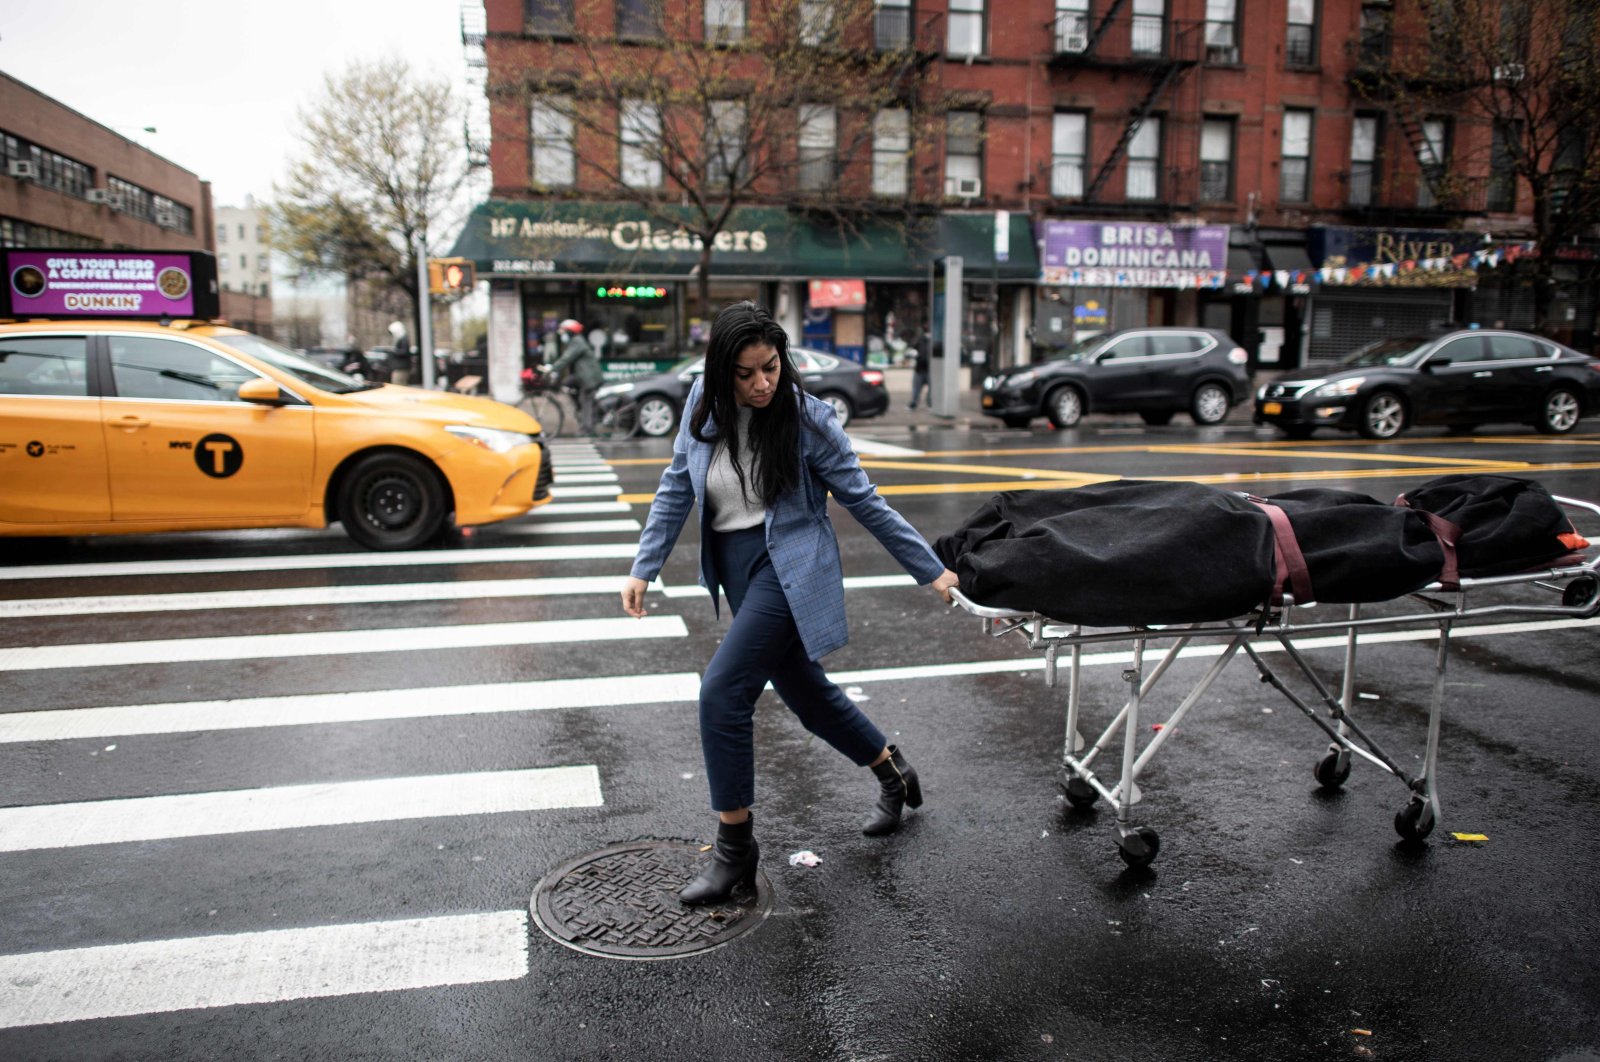 Alisha Narvaez Manager at International Funeral & Cremation Services transports a body to the funeral home in the Harlem neighborhood of New York City, New York, U.S., April 24, 2020. (AFP Photo)